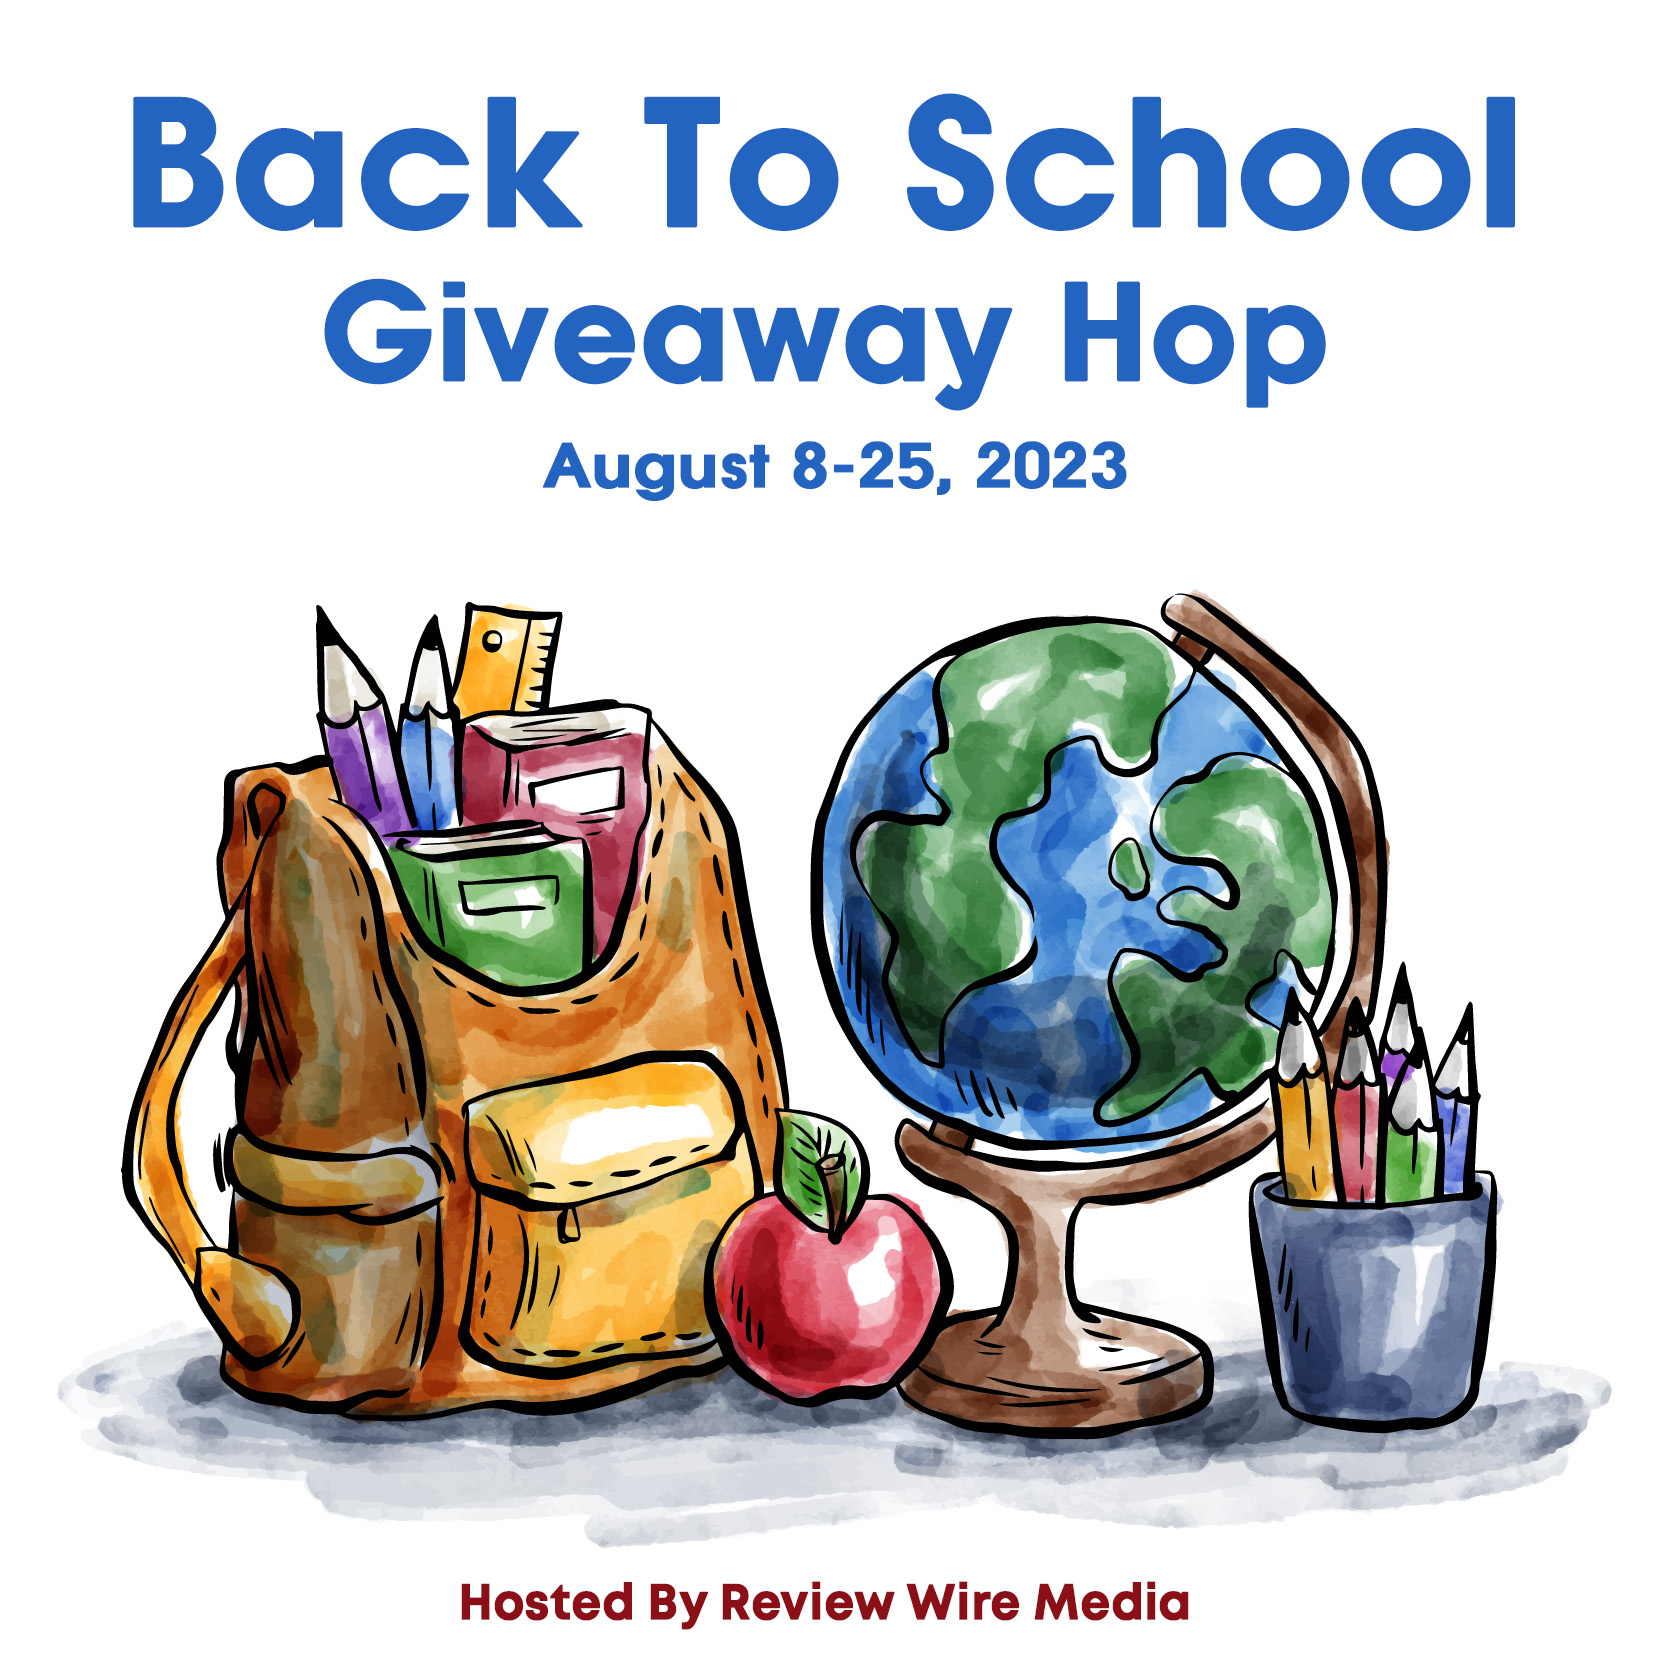 Back to School Giveaway Hop – Sponsored by @TheReviewWire & @chattypattysplc